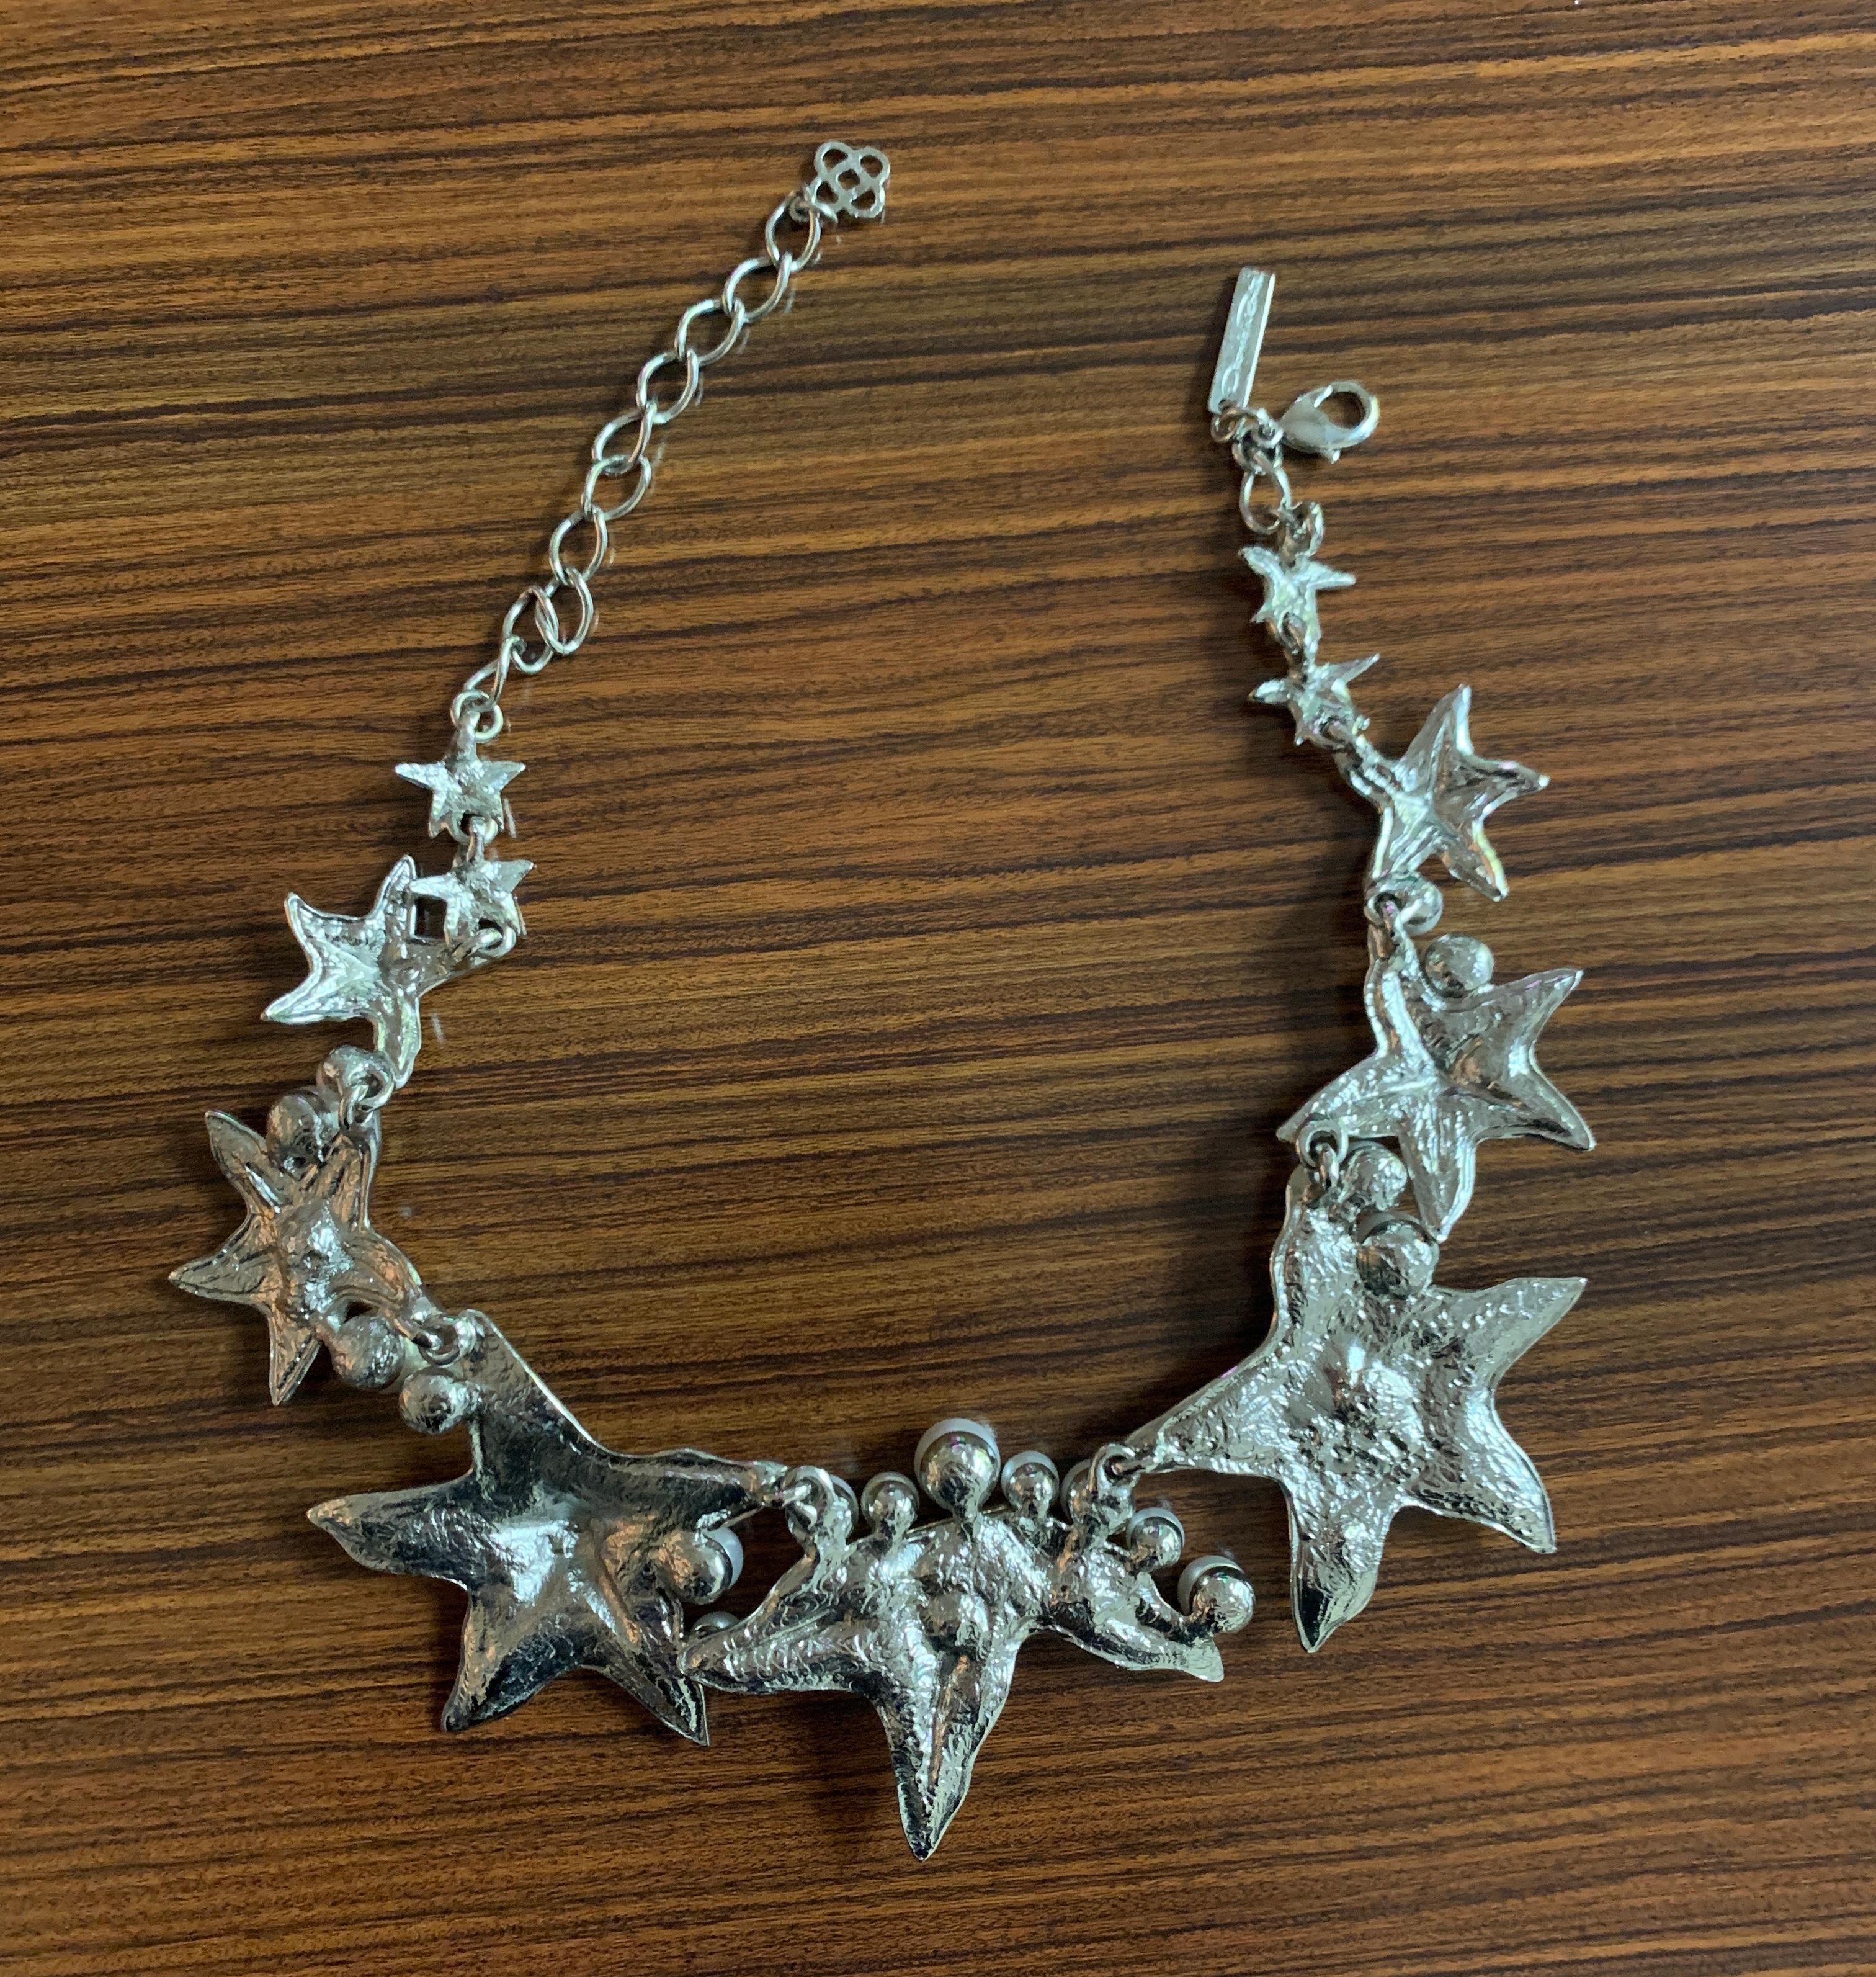 Oscar de la Renta Starfish Necklace in Silver and Gold Tone with Faux Pearls In Excellent Condition For Sale In San Francisco, CA